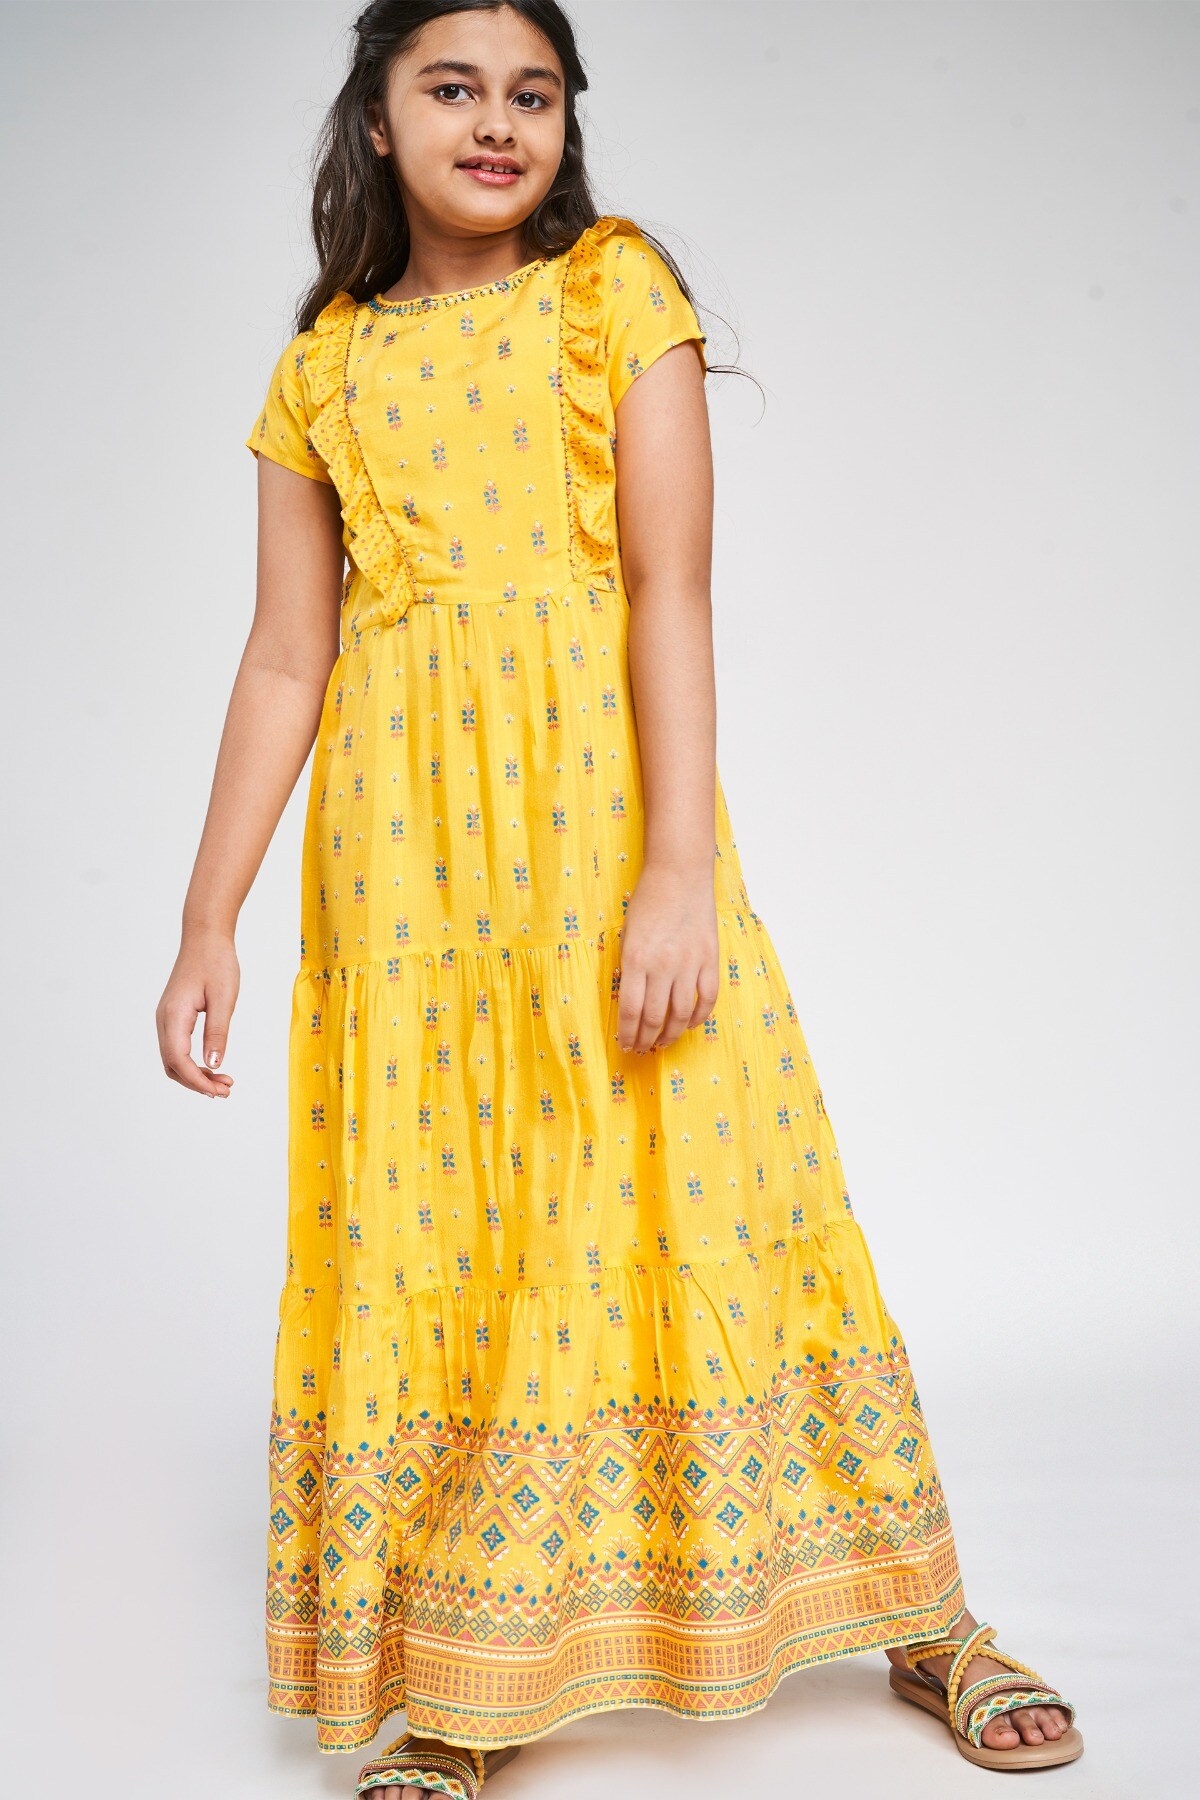 Global Desi | Yellow Ethnic Motifs Printed Fit And Flare Dress